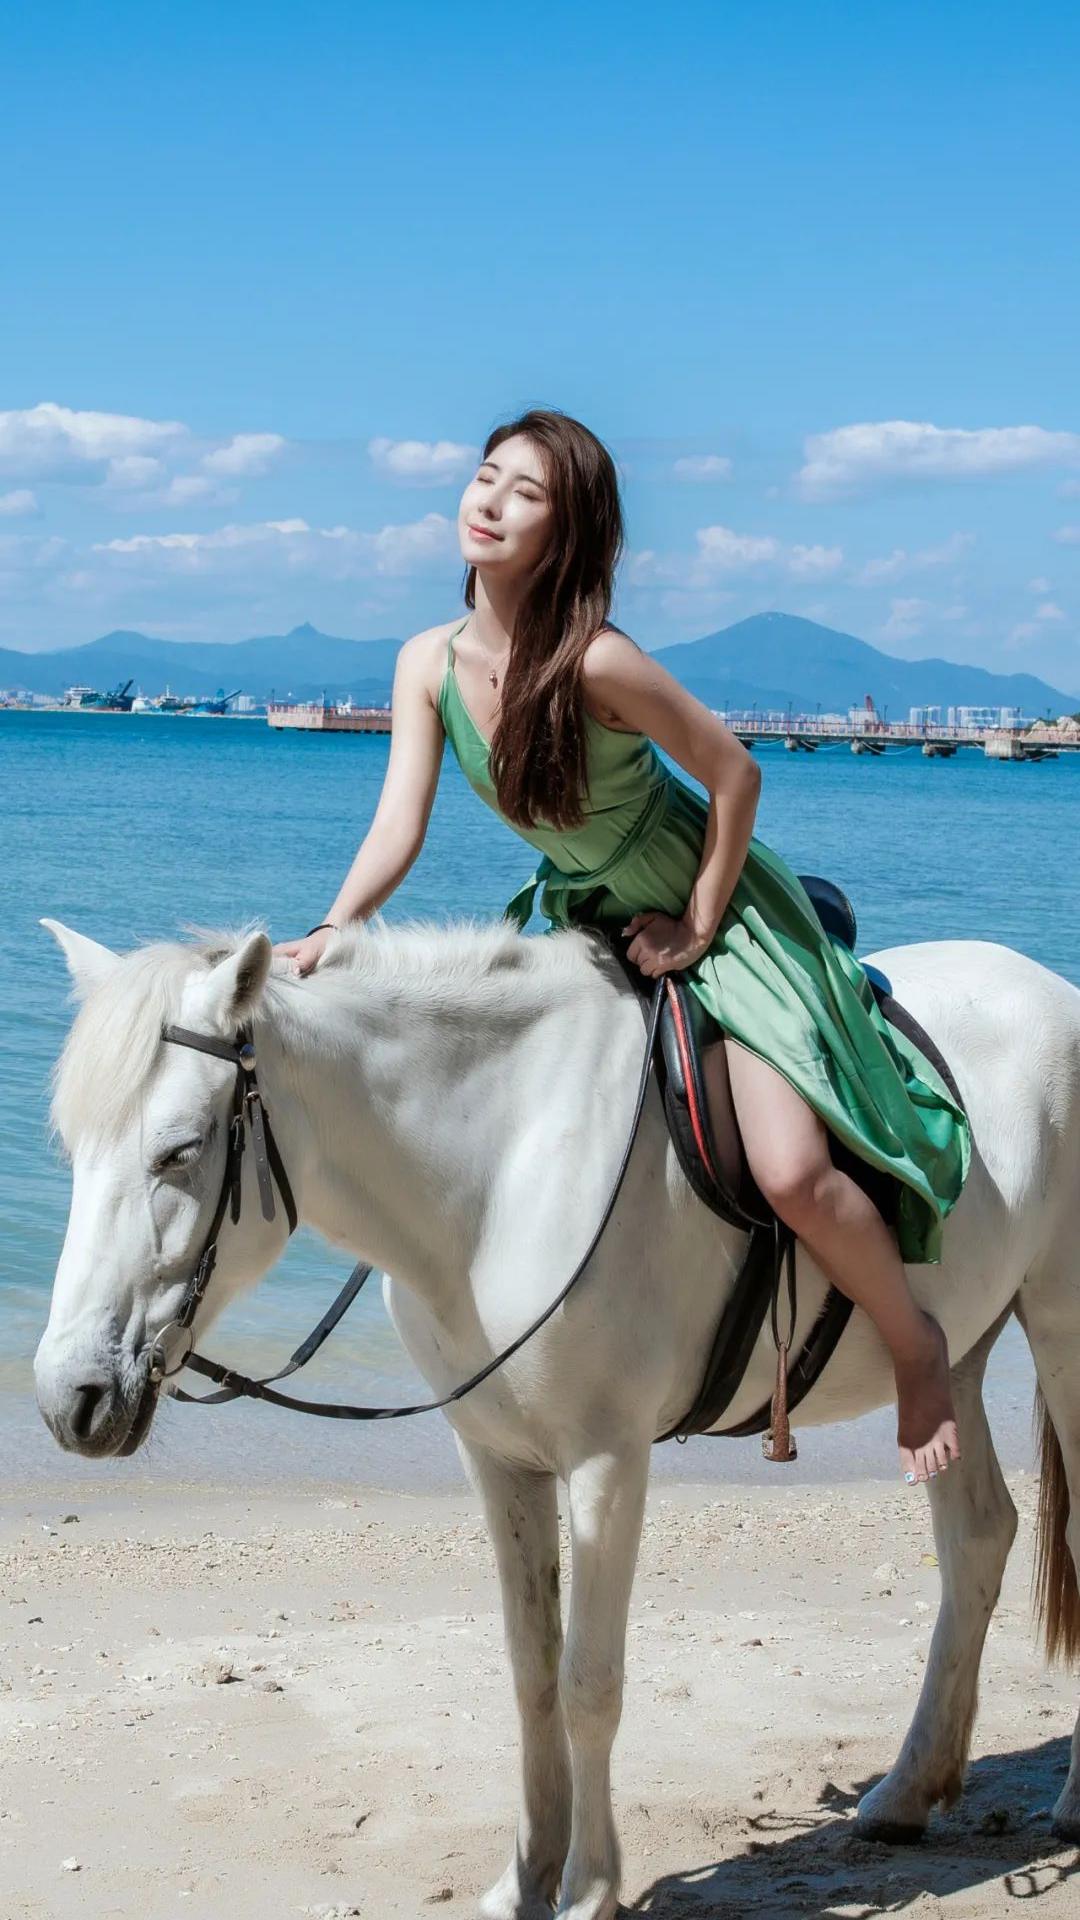 Long Hair Girl On Horse By Wlop, HD Fantasy Girls, 4k Wallpapers ...